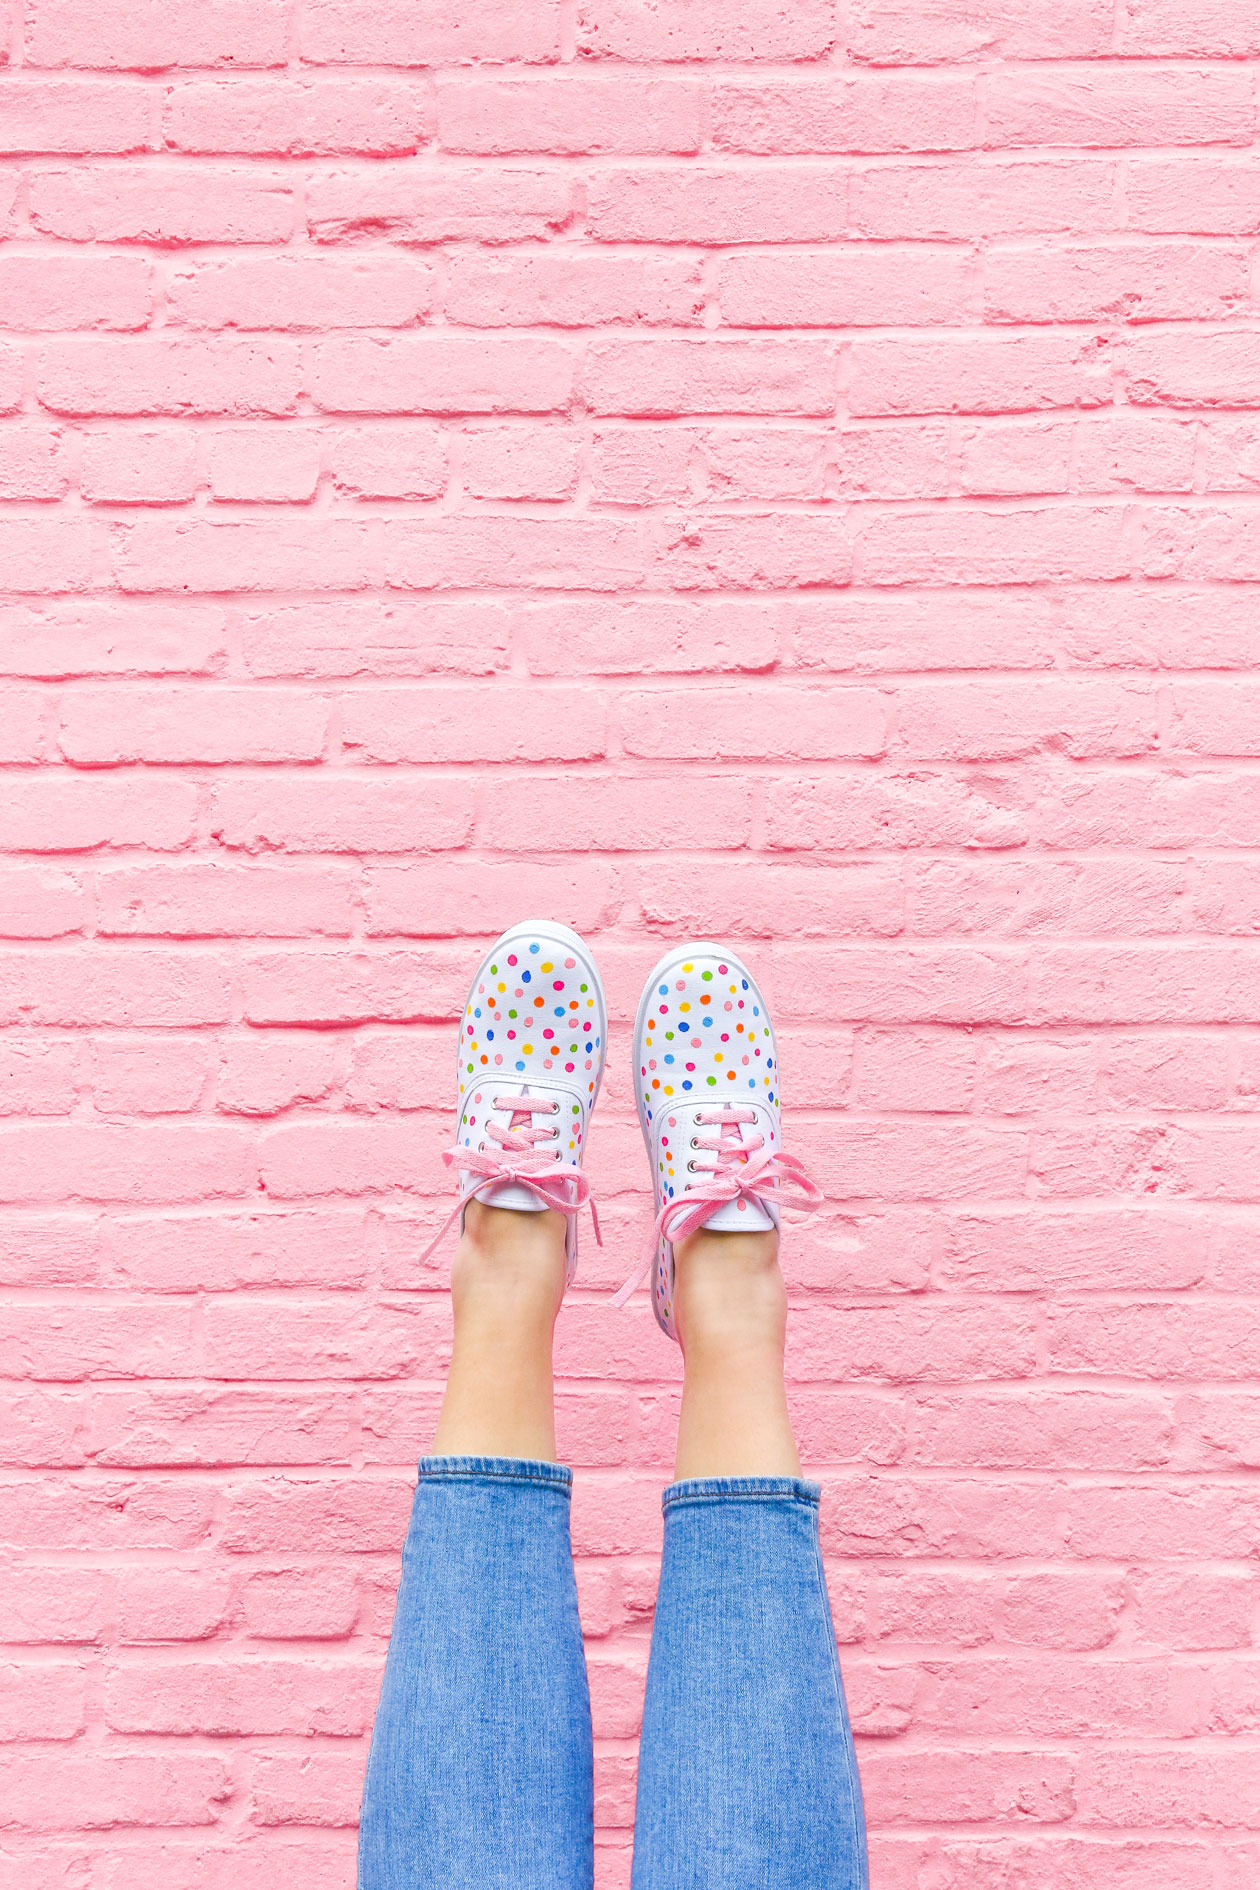 Want Kate Spade Shoes but don't have the budget? Try this easy DIY! Add color to your step with these DIY Confetti Shoes! Polka dot shoes every looked this cute.